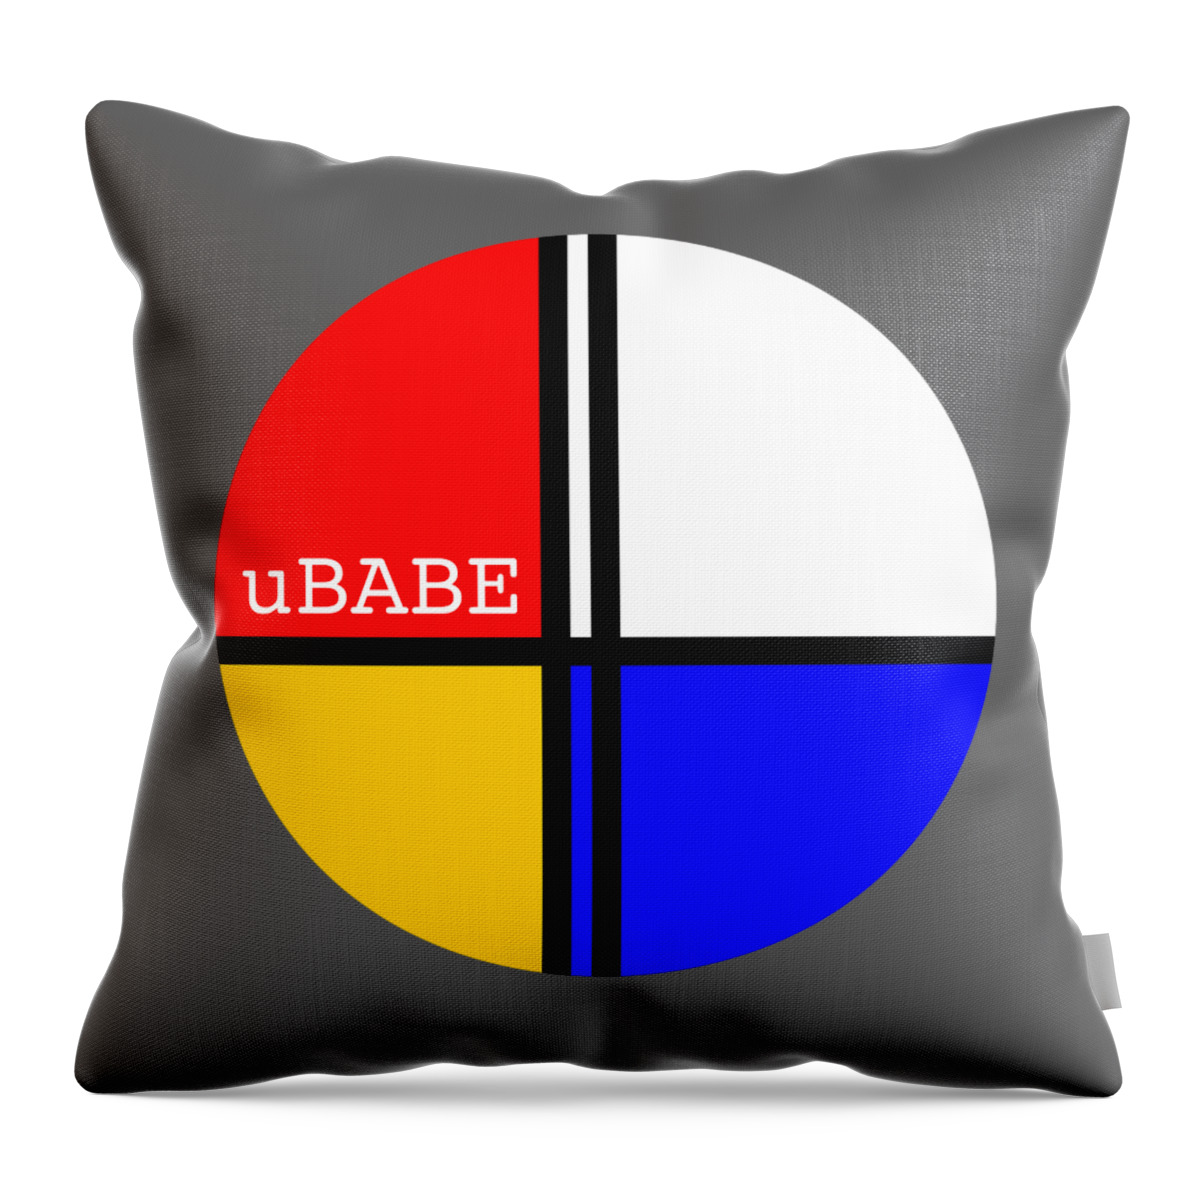 De Stijl Circle Throw Pillow featuring the digital art Circle Style by Ubabe Style